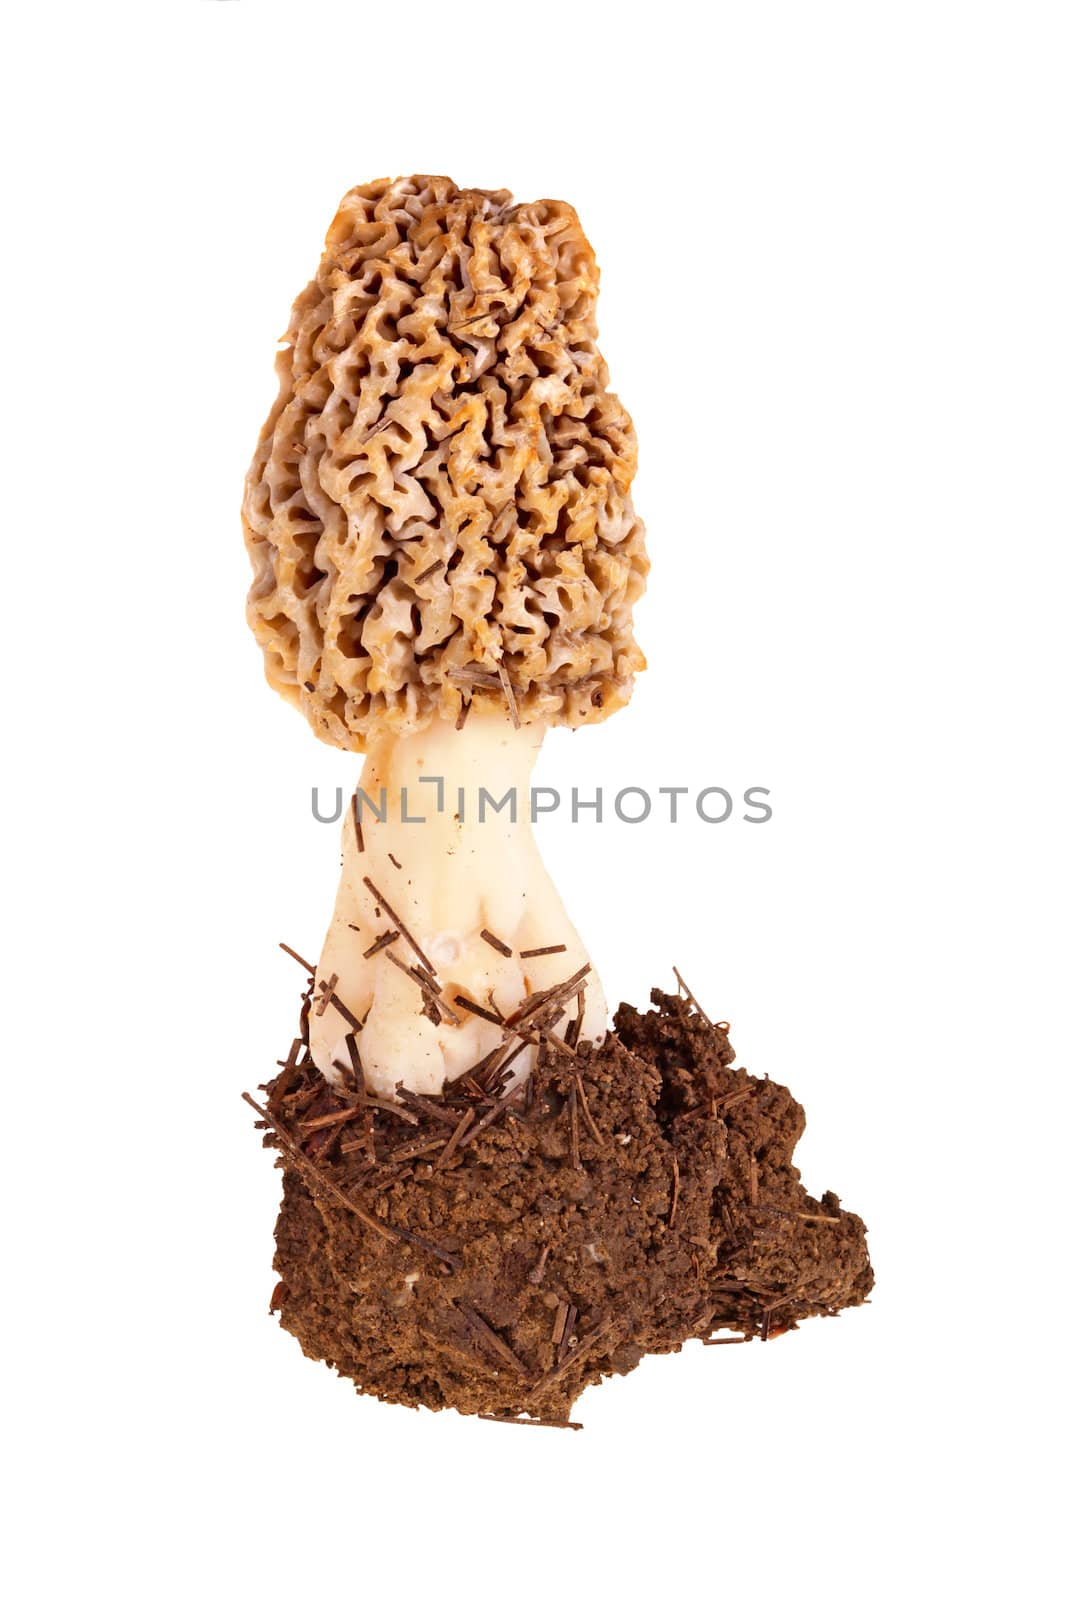 Sporocarp of a freshly picked yellow morel mushroom (Morchella esculenta or esculentoides) with its soil substrate collected from a back yard in Indiana isolated against a white background